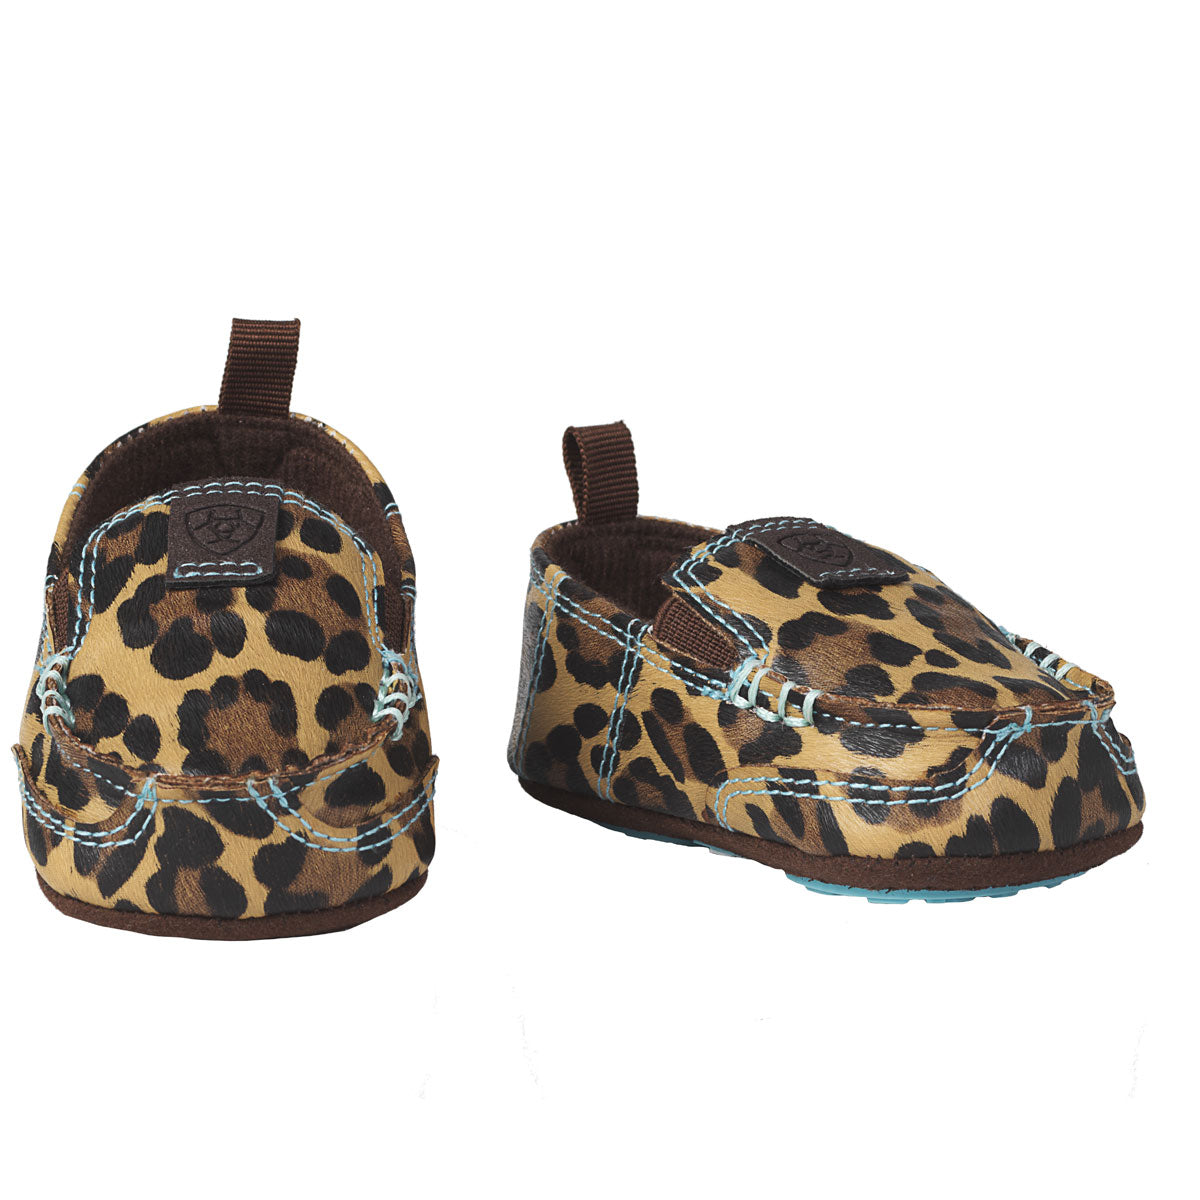 Ariat Infant Girl's Natalie Style Leopard Print Lil Stompers